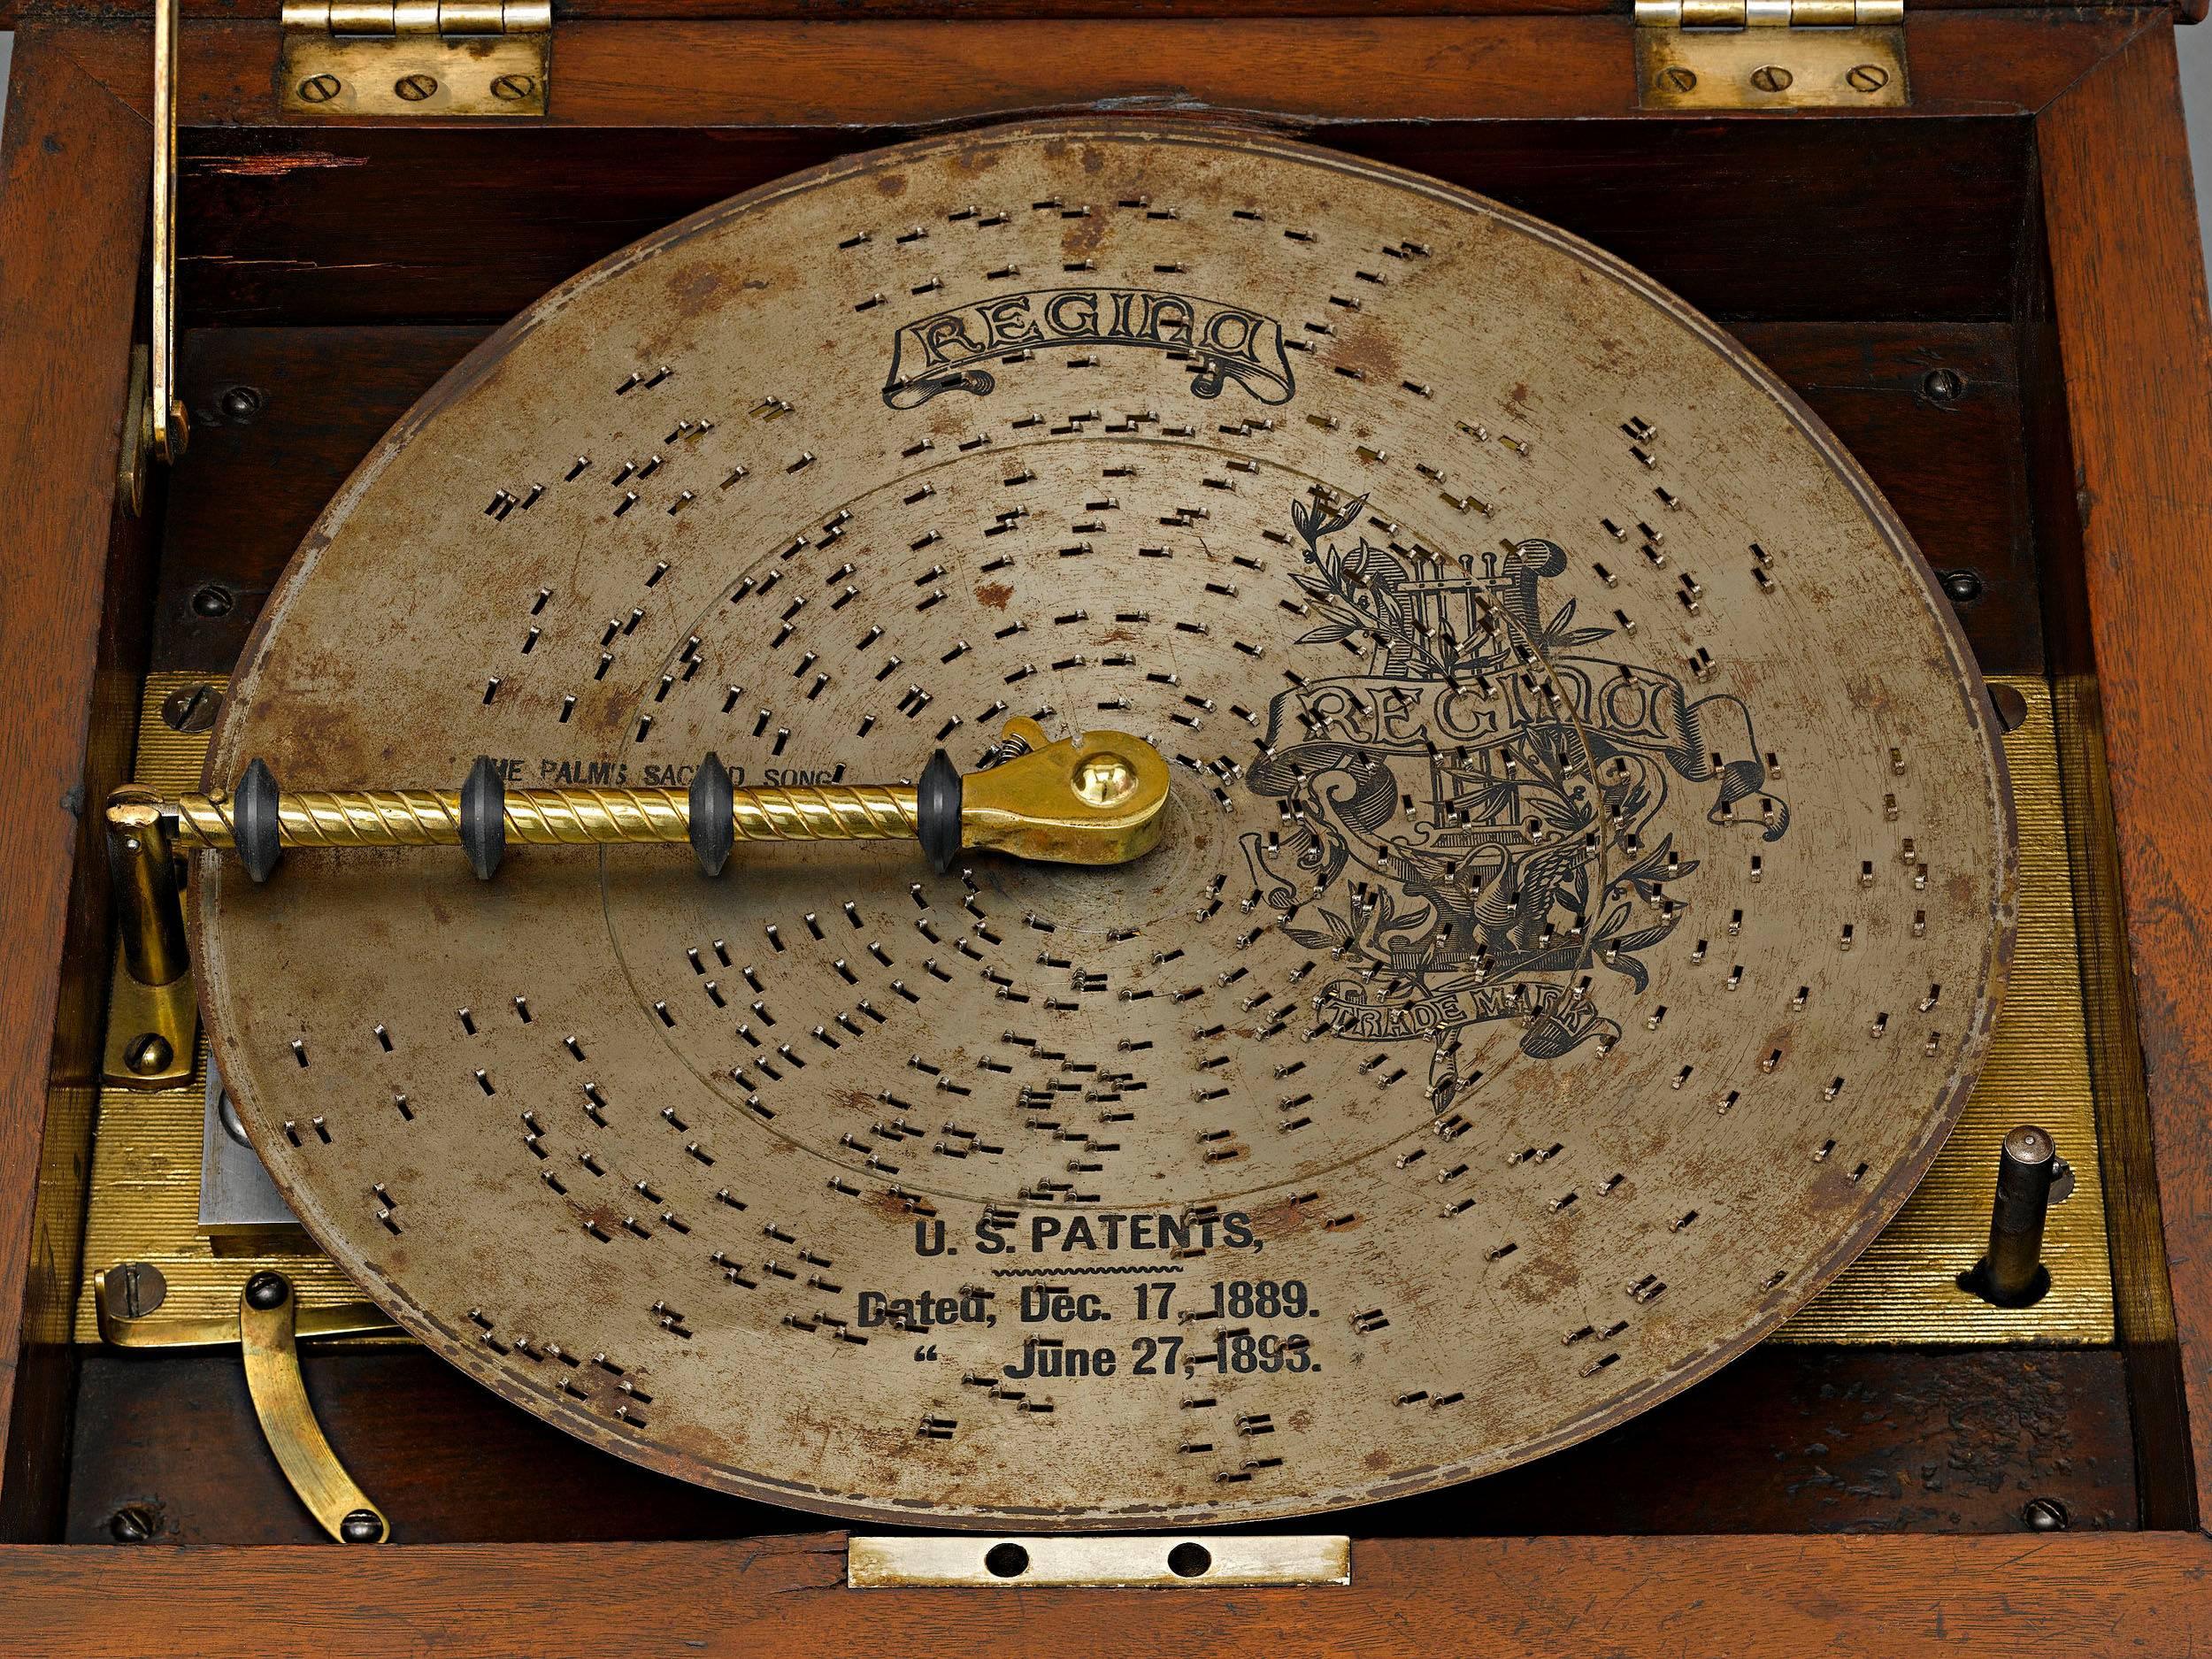 The Regina Music Box Company of New York crafted this wonderful interchangeable disk music box with one of its most ornately carved walnut cases. The box, known as Style 19 plays 11 disks with a double-comb mechanism and retains the incredible sound